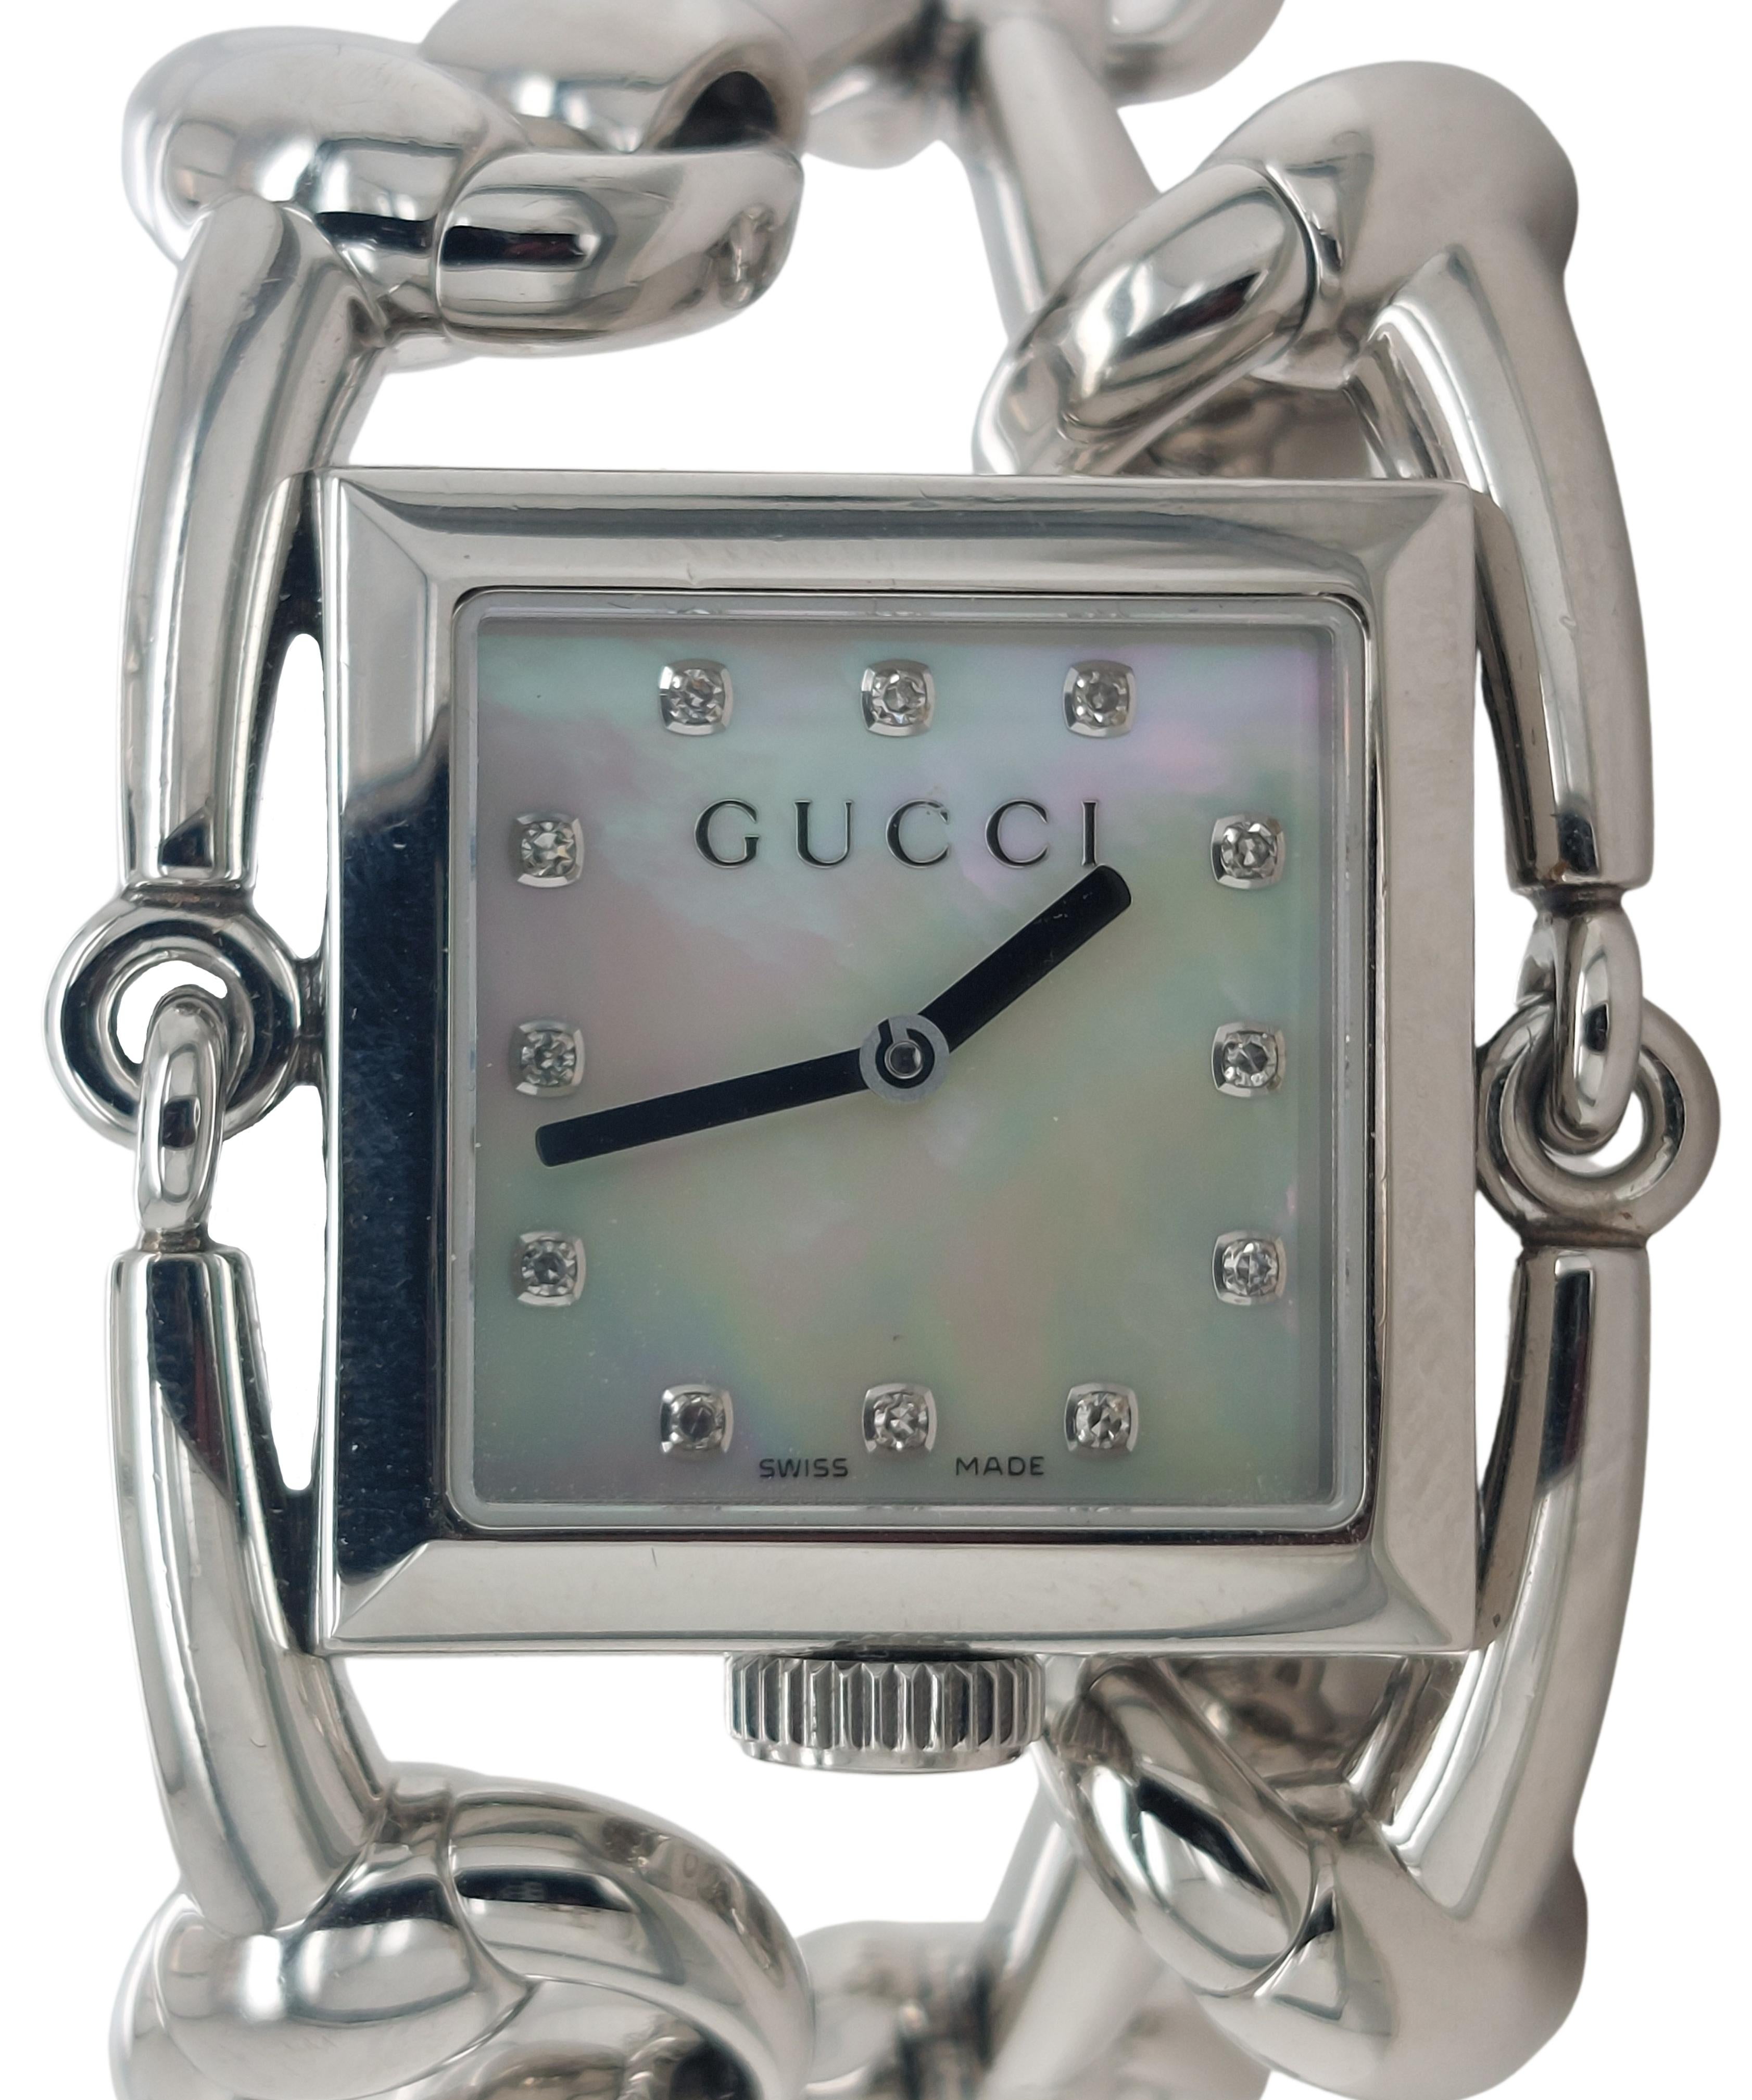 Gorgeous Gucci 116.3 Signoria Horsebit  Steel Watch with Mother of Pearl Dial, Quartz With Box & Papers

Movement: Quartz

Functions: Hours, minutes

Case: stainless steel, diameter 24.8 x 24.5 x 7.40 mm, crown at 6 o'clock, sapphire glass, back